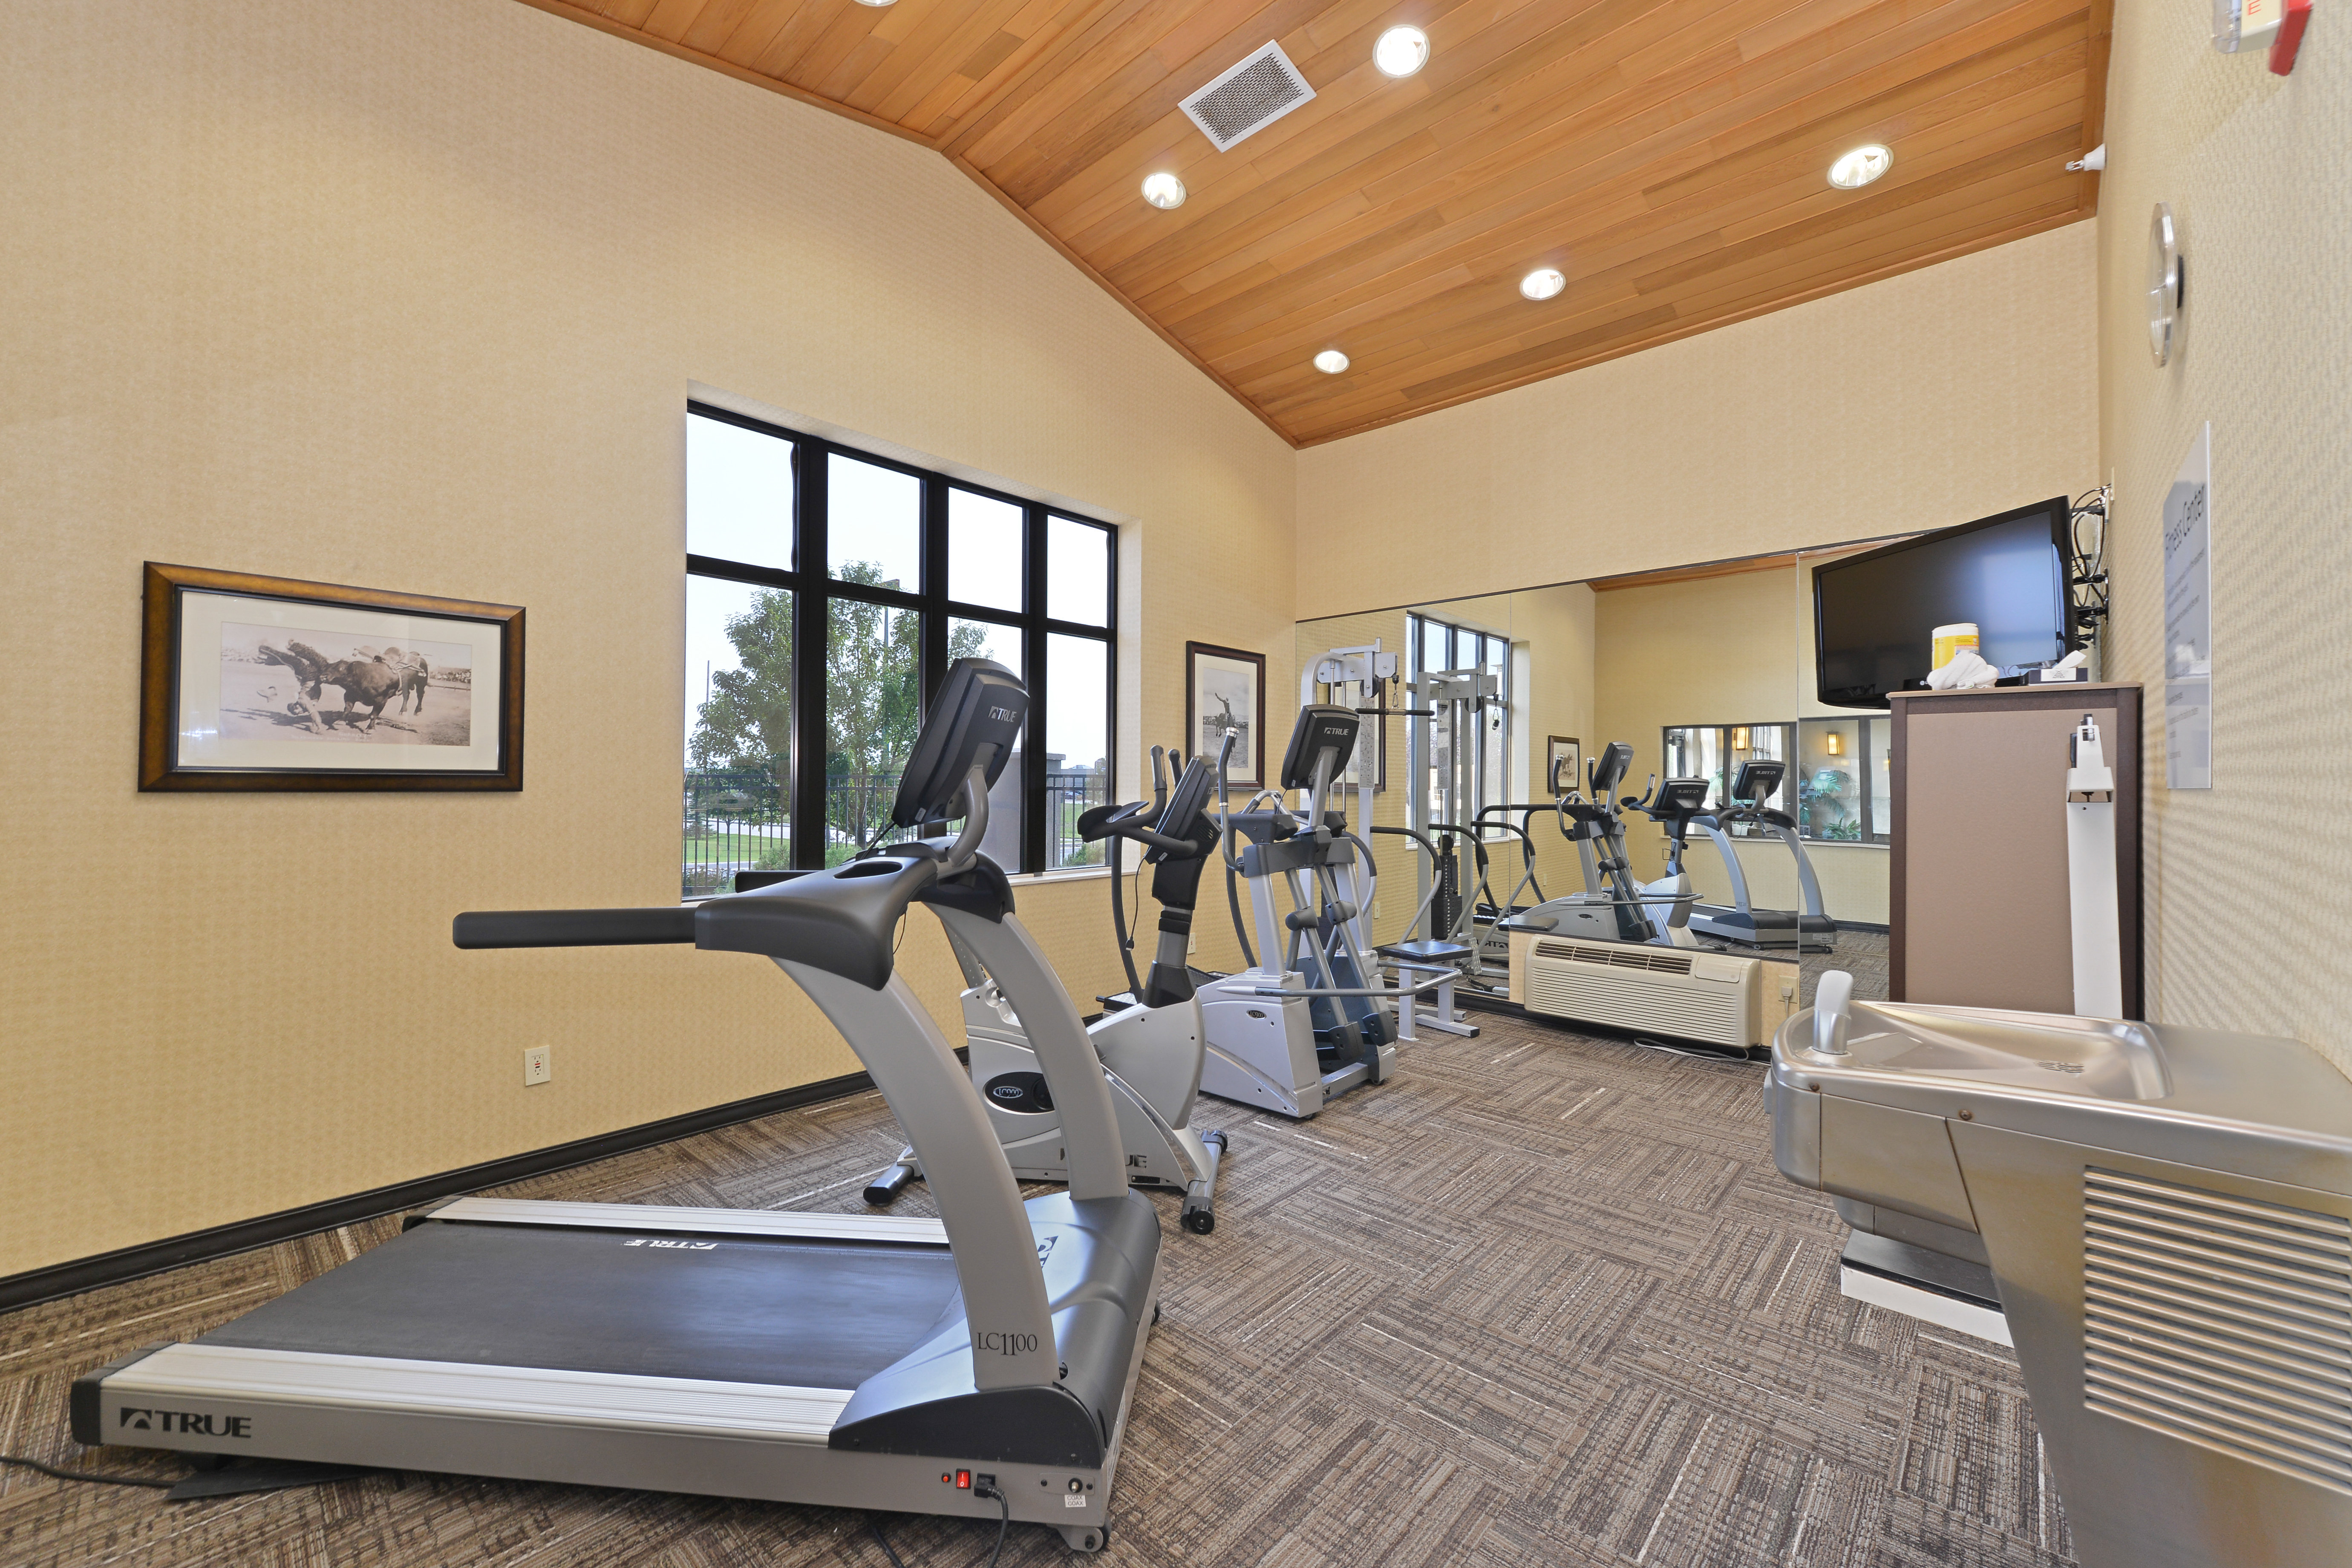 Stretch, Run, Step, Cycle, Lift, Sweat, Repeat FREE Fitness Center